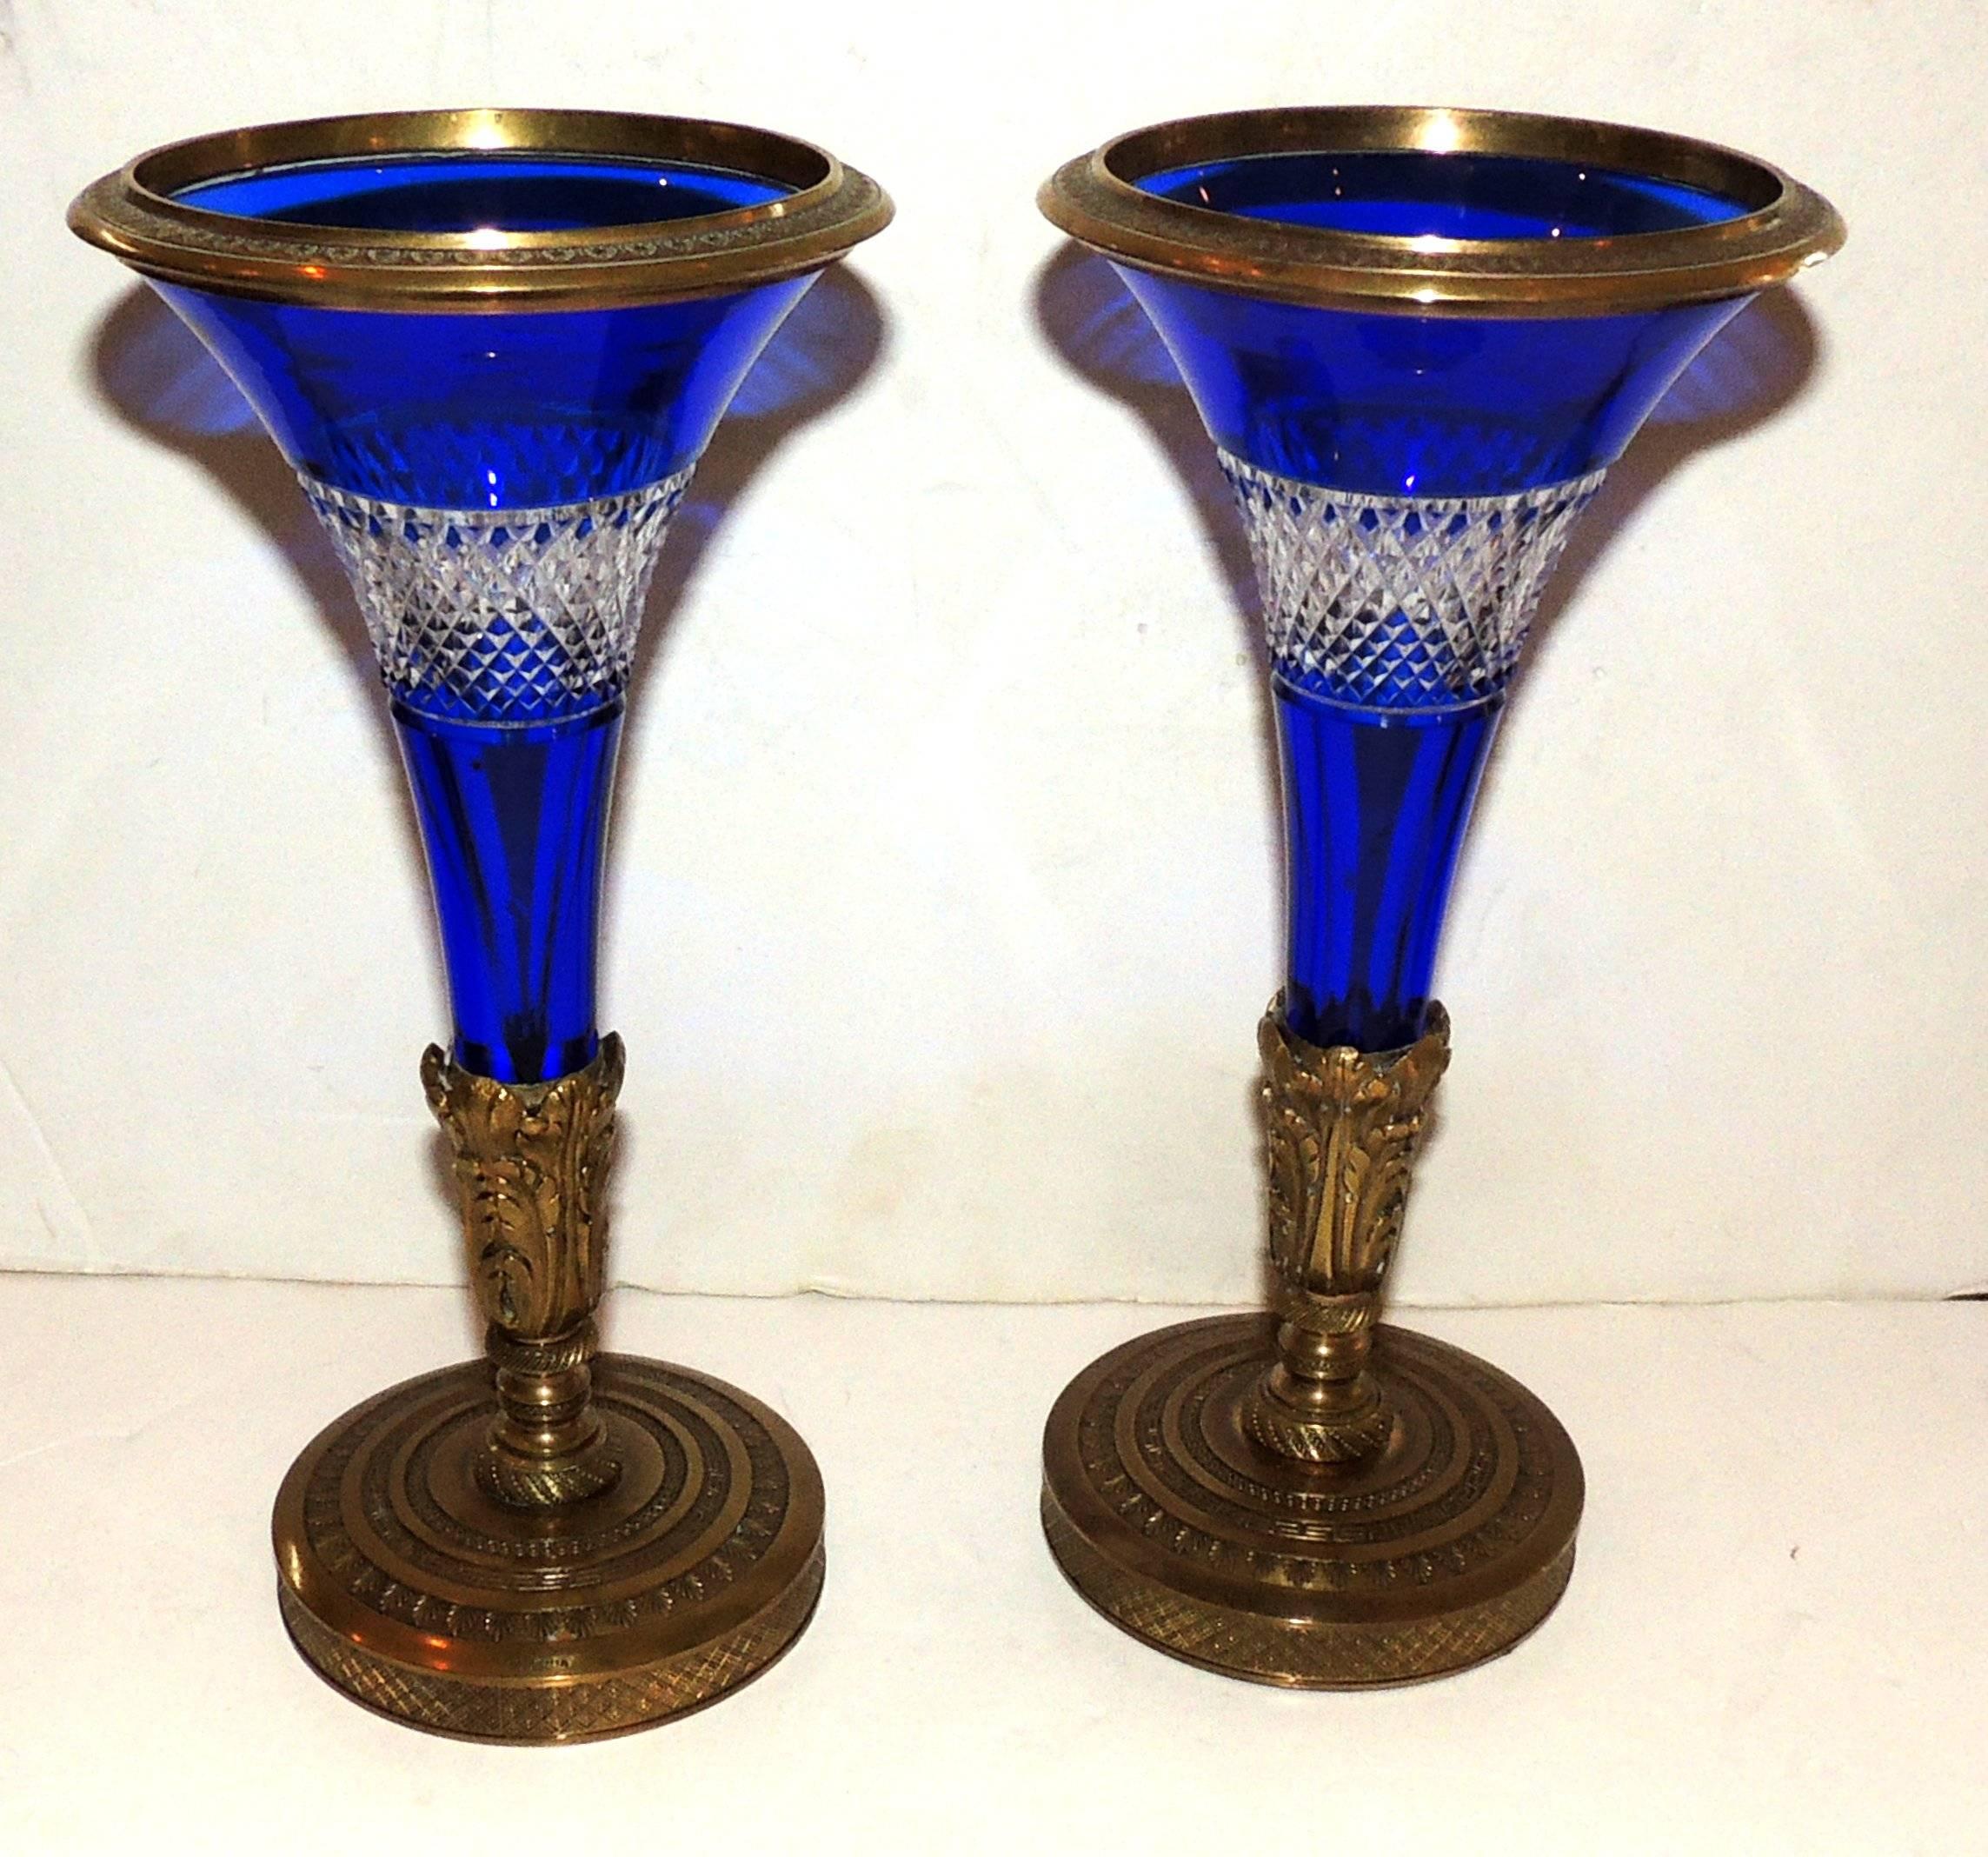 A wonderful pair of finely detailed Austrian doré bronze-mounted with cobalt cut crystal vases

Measures: 9.25